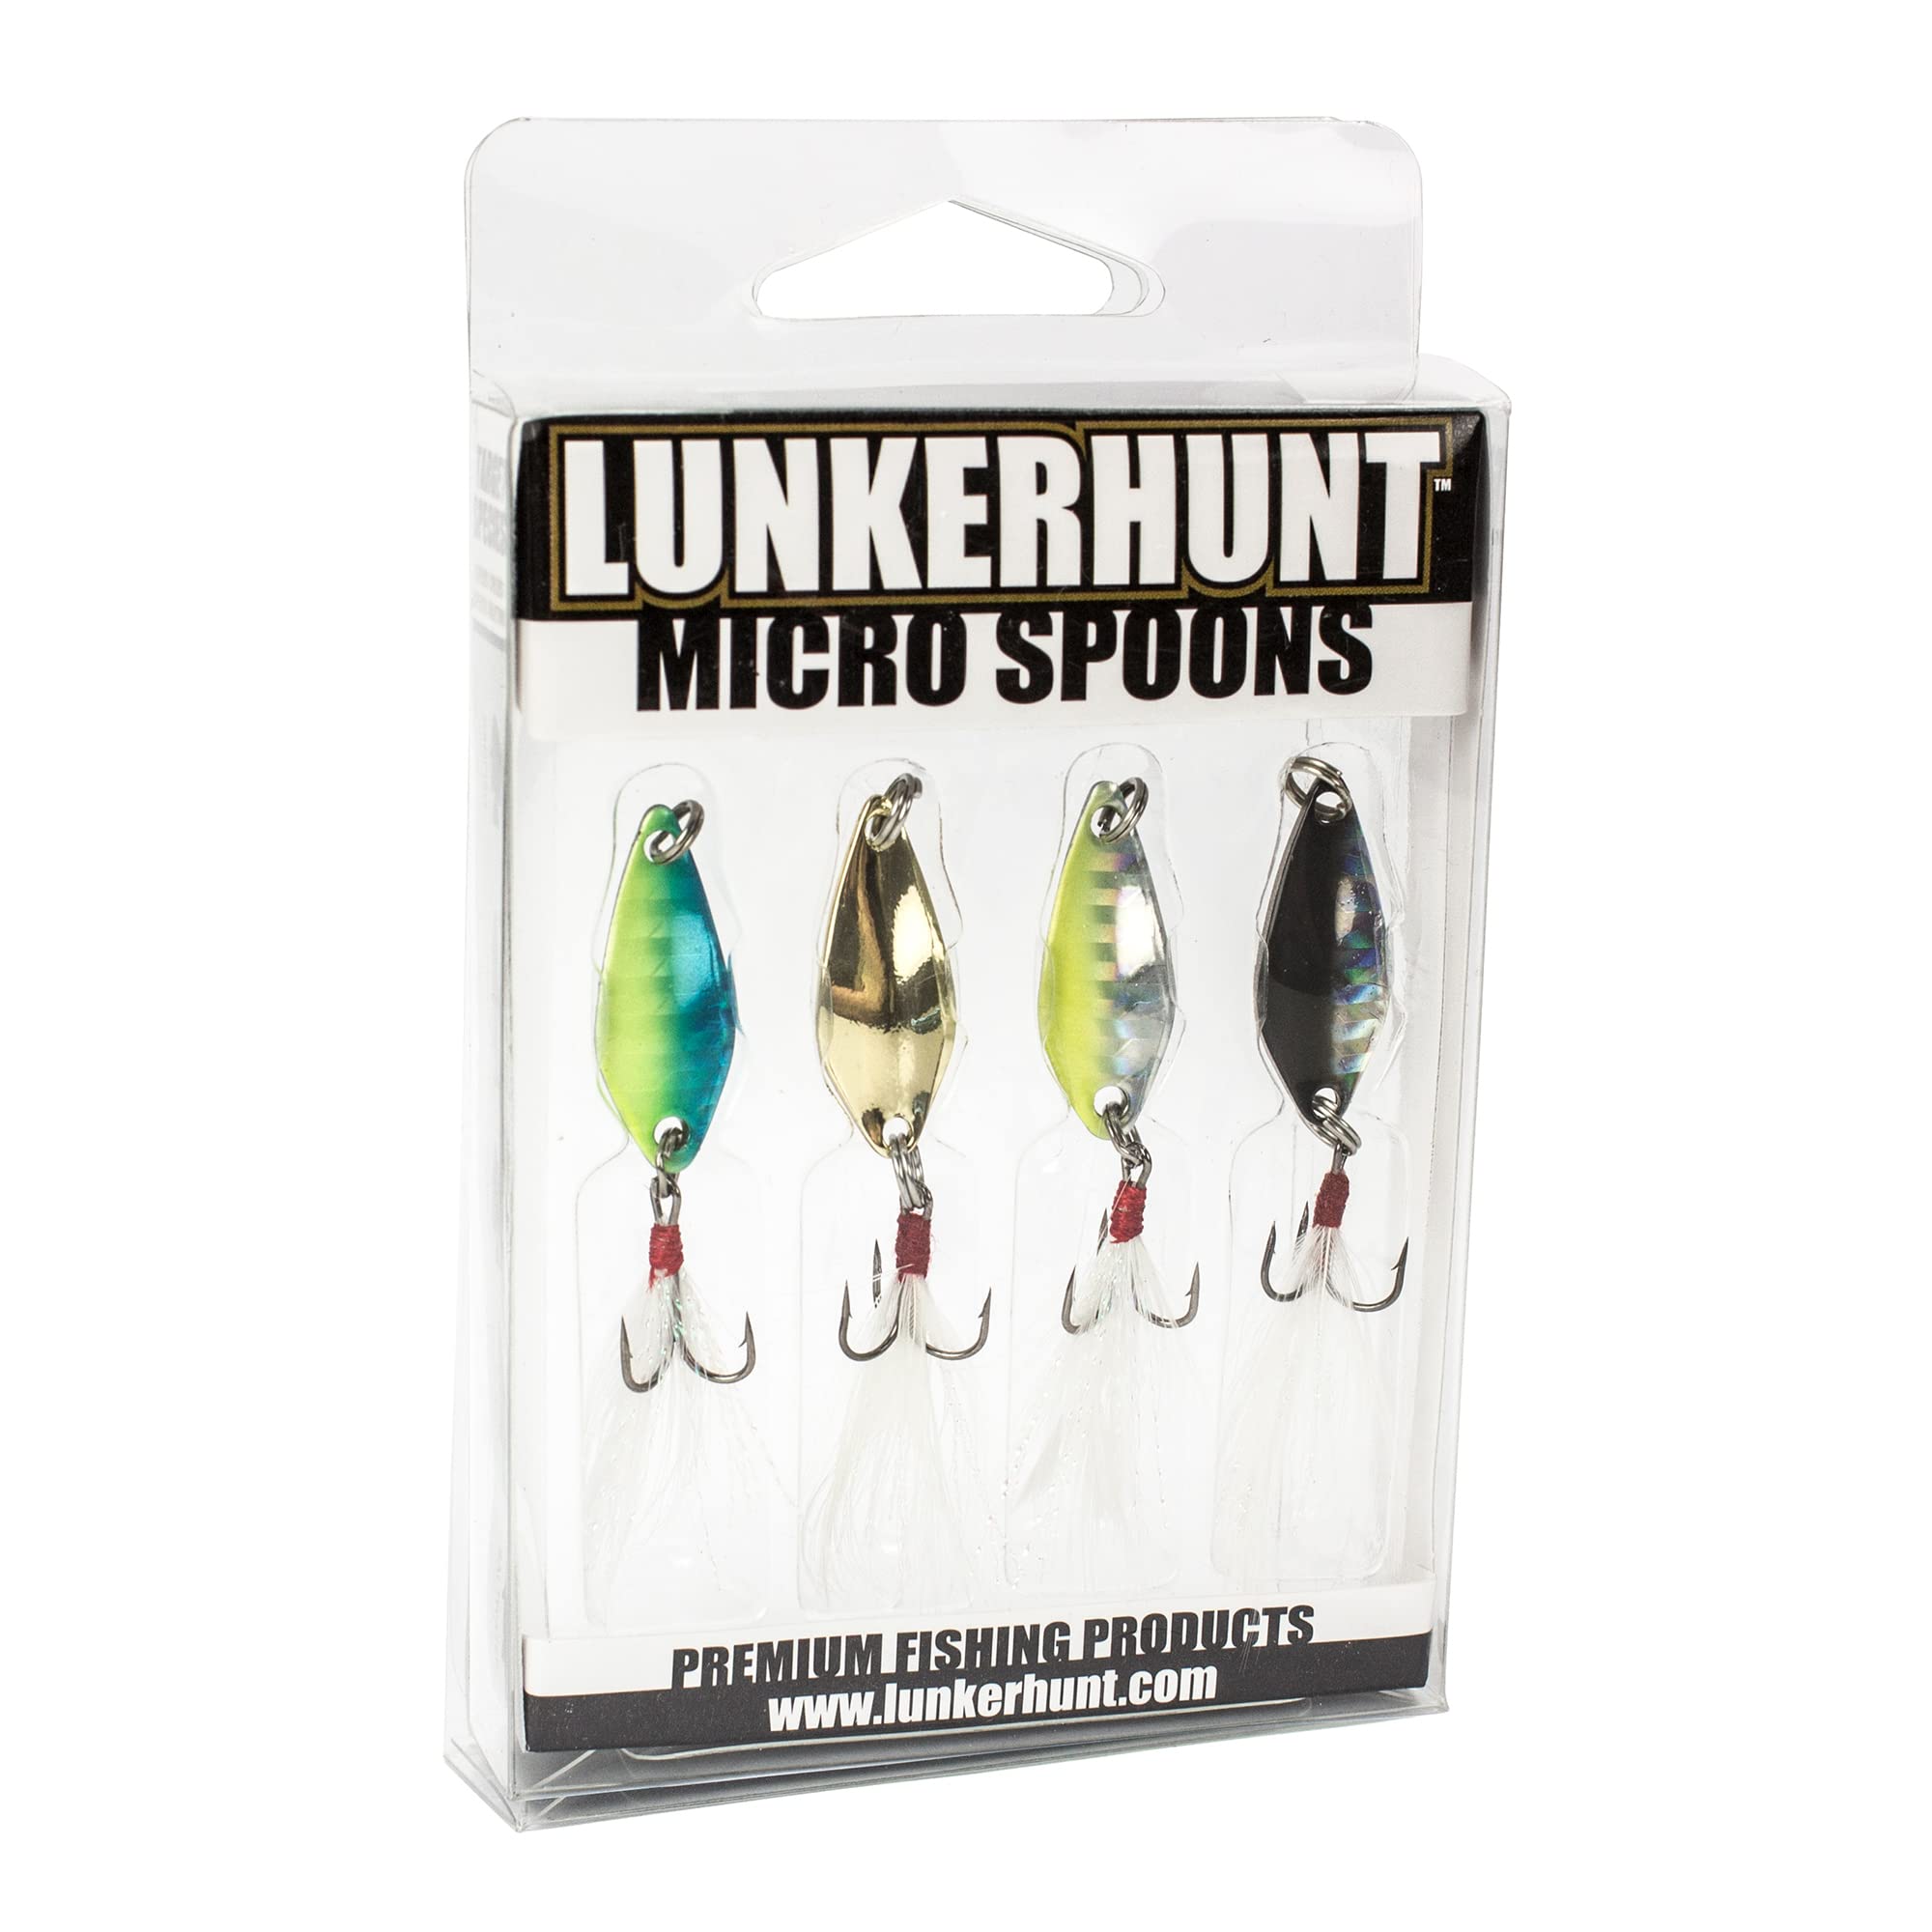 Lunkerhunt Micro Spoon Fishing Lures (4-Pack)  Spoon Fishing Bait  Saltwater for Bass Fishing and